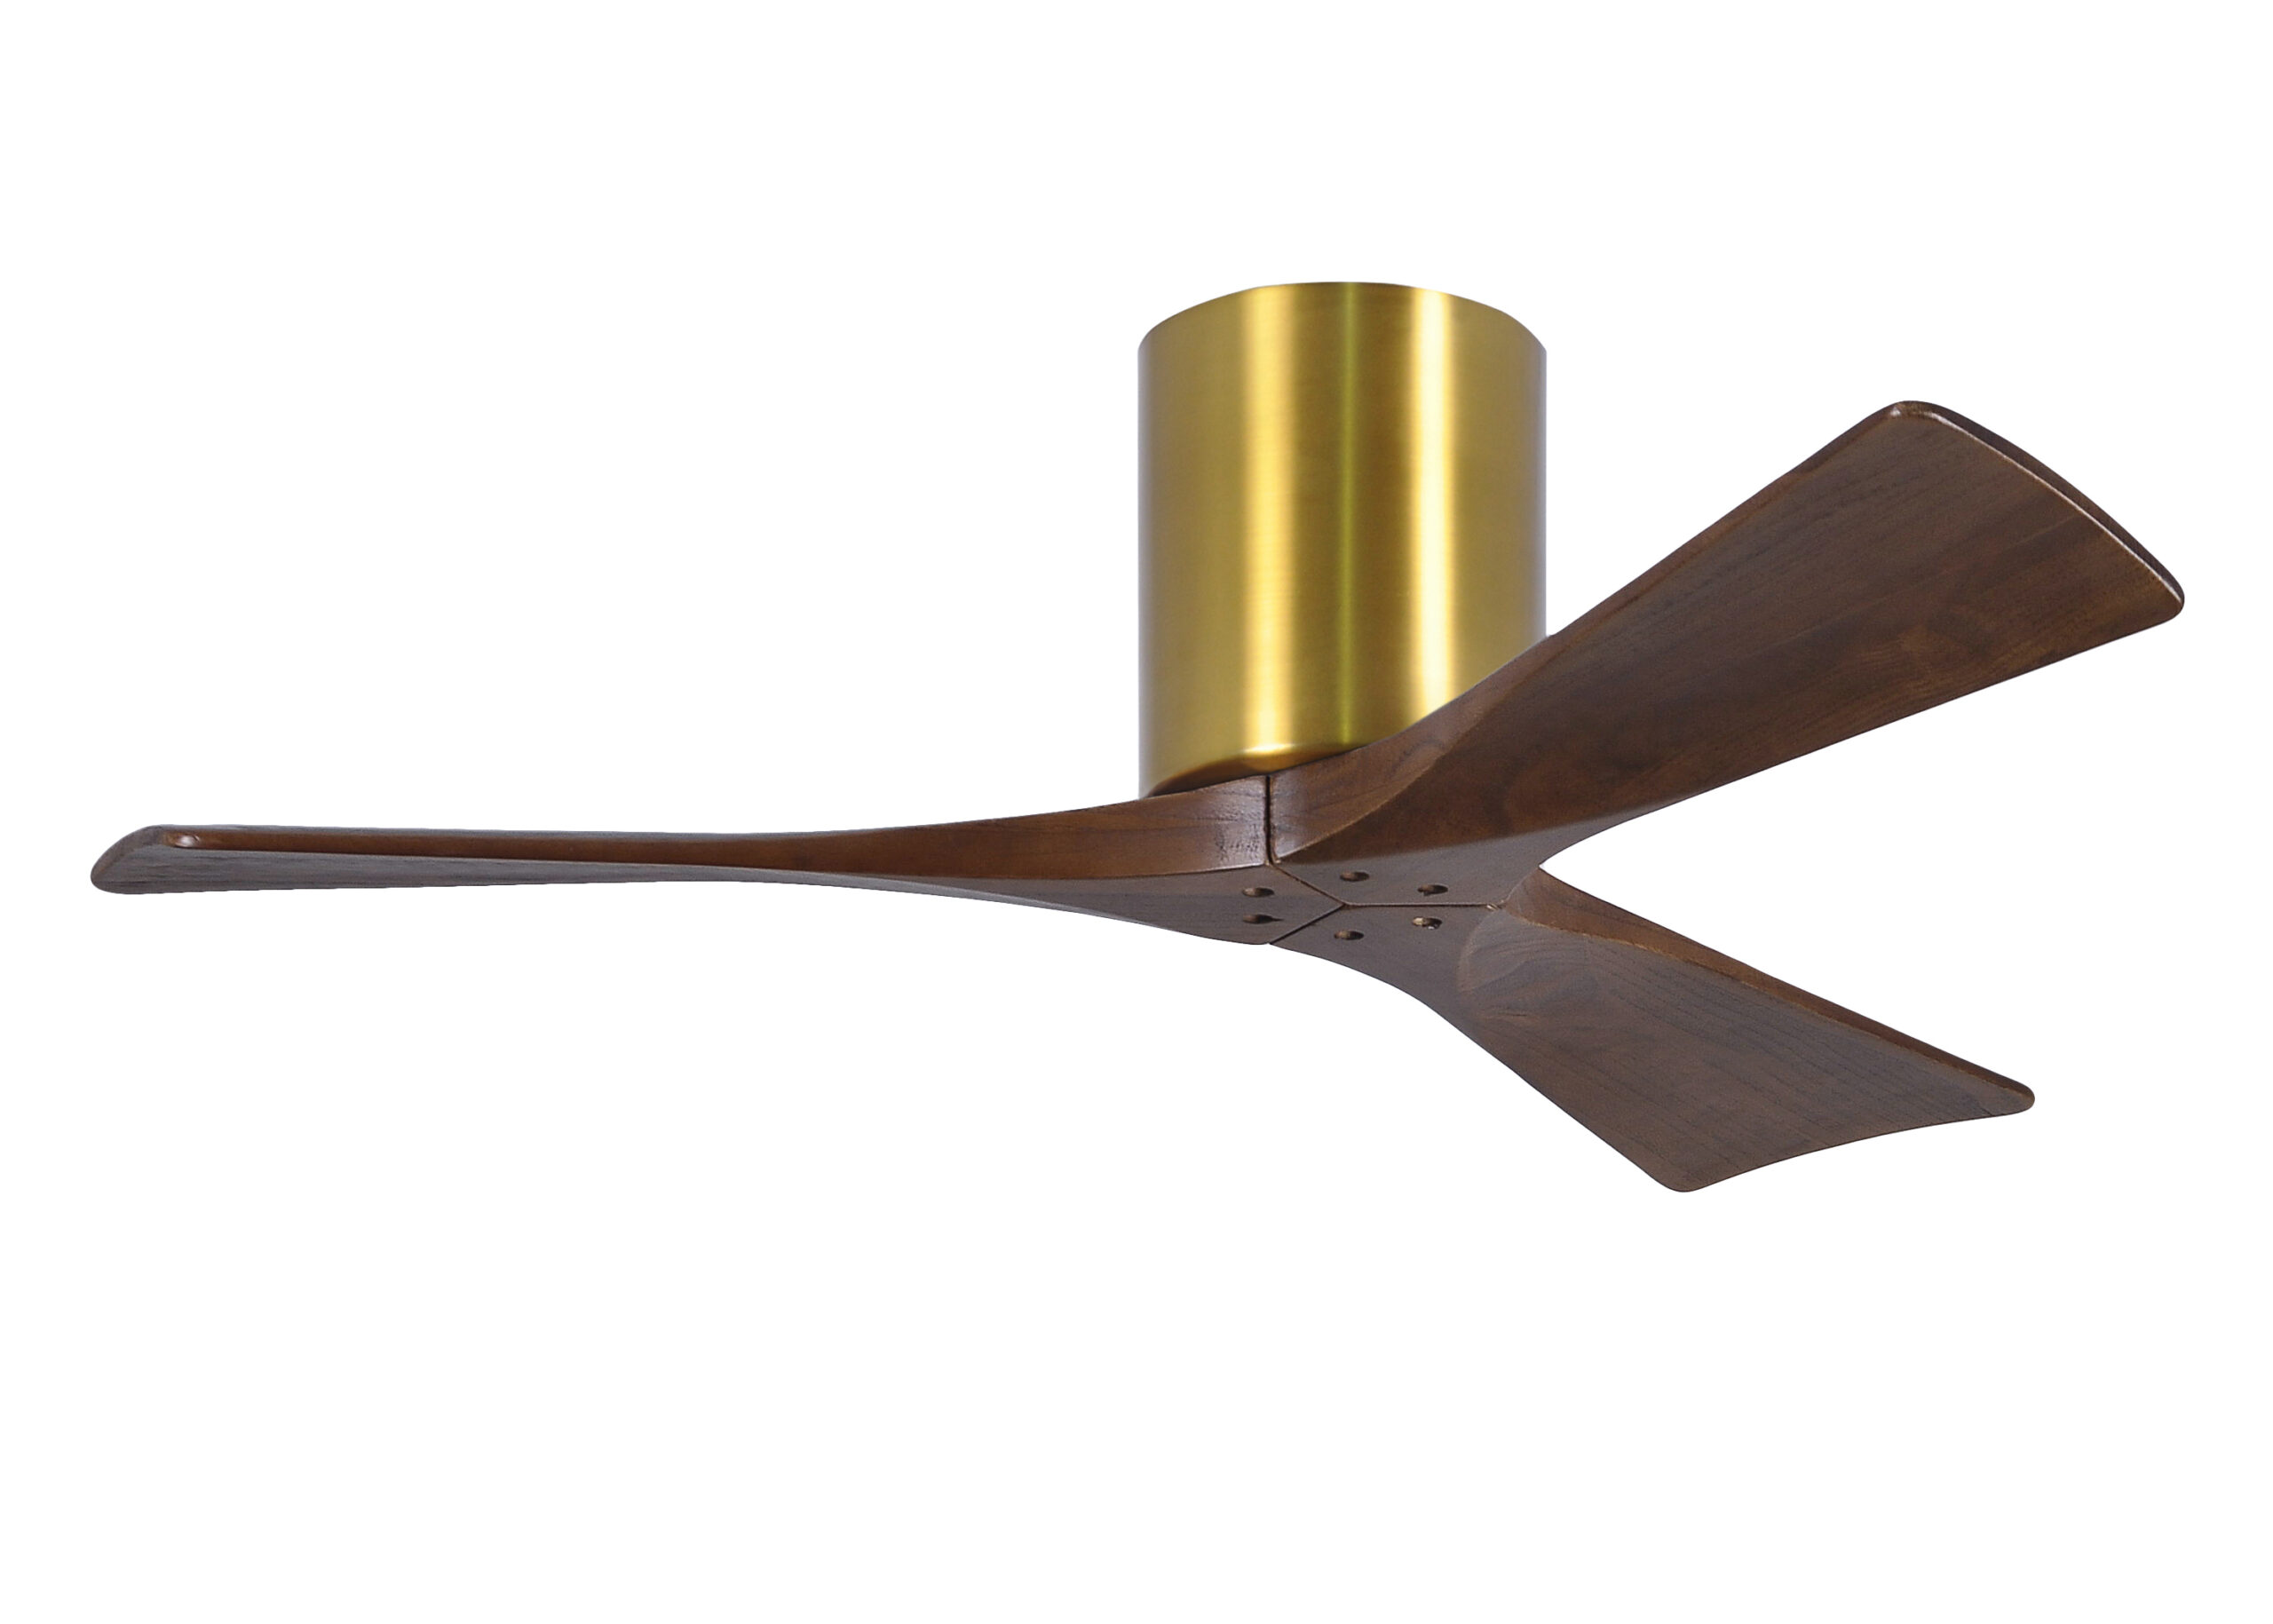 Irene-3H ceiling fan in Brushed Brass finish with 42